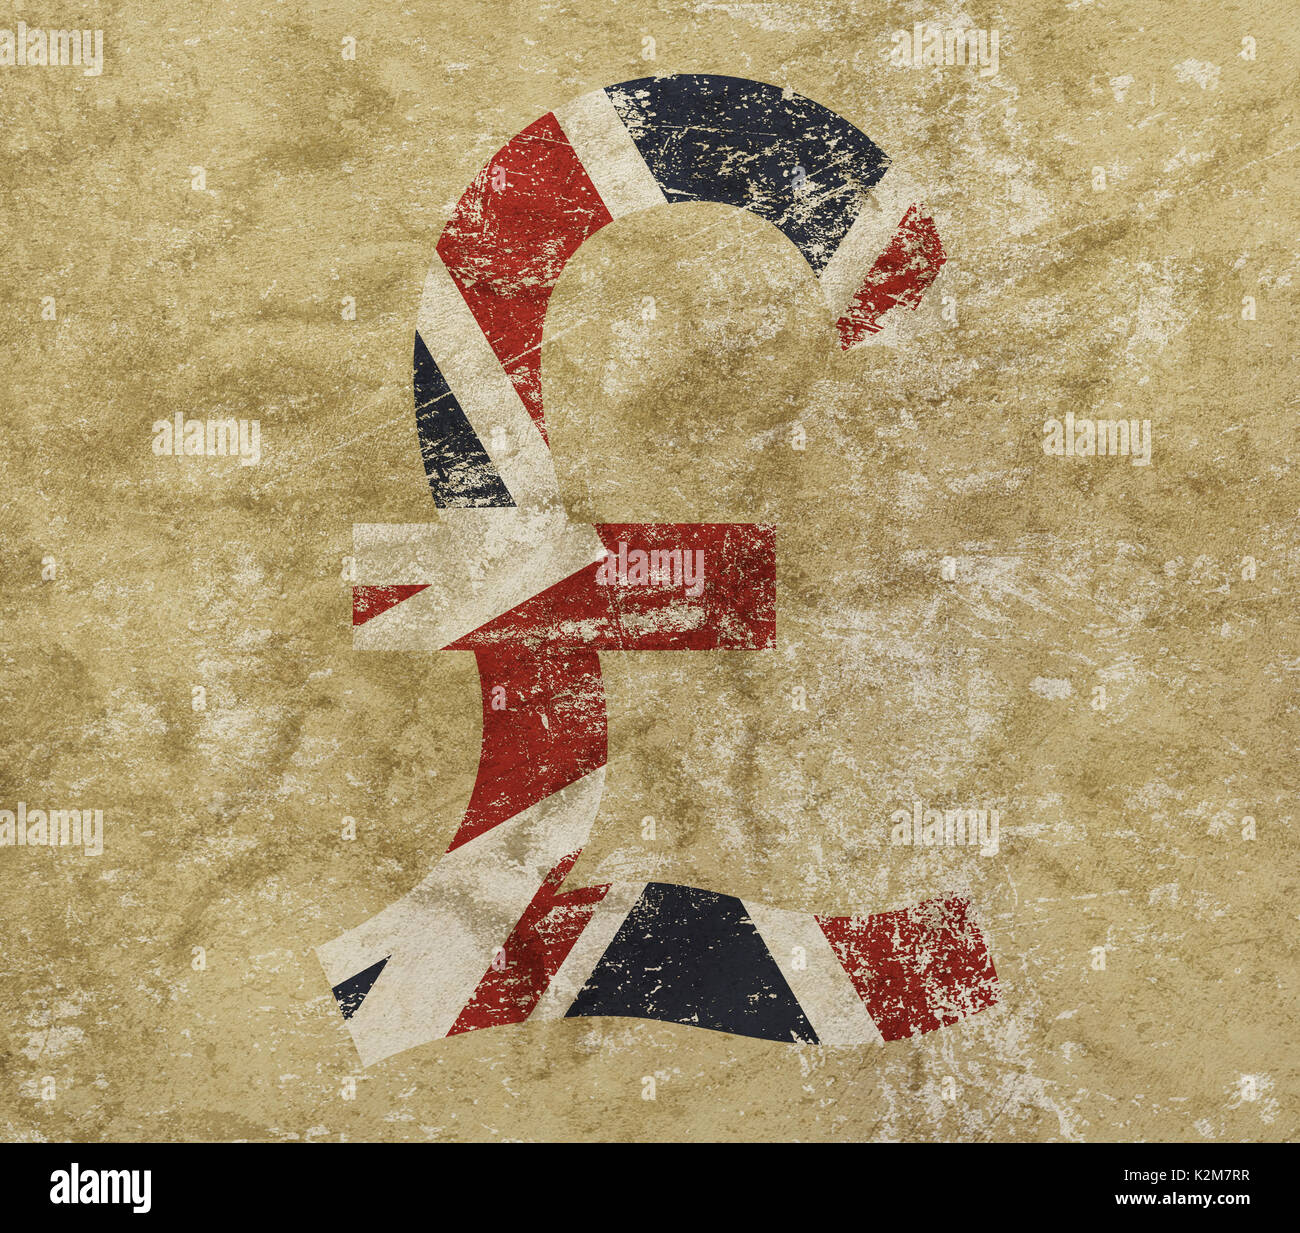 British pound currency icon sign with UK flag over distressed shabby grunge background Stock Photo